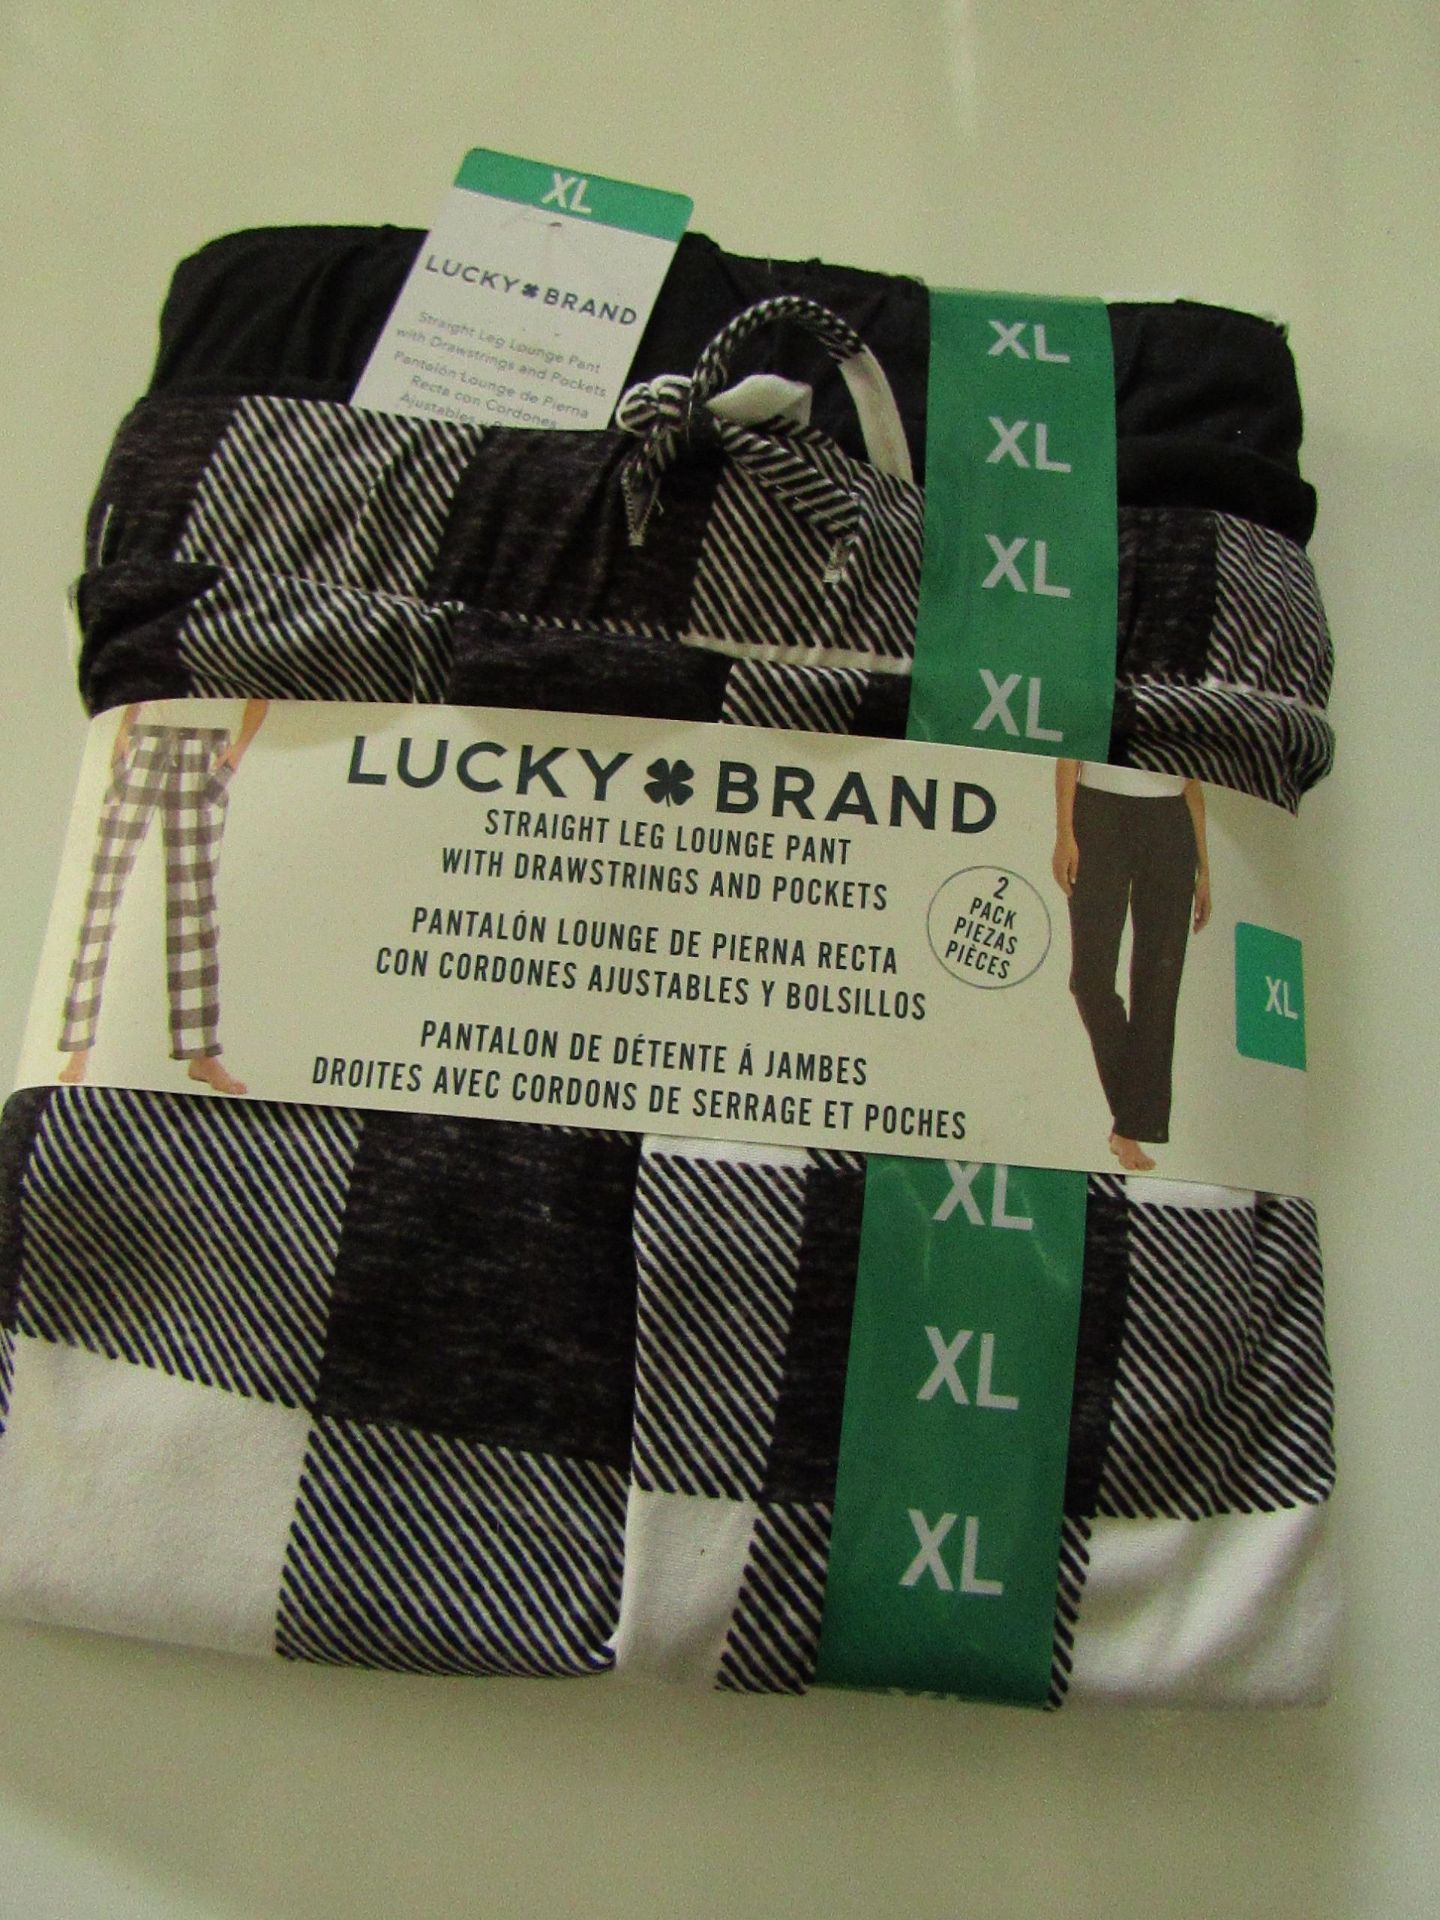 Lucky Brand - Straight Leg Lounge Set With Pockets - Size X-Large - New & Packaged.